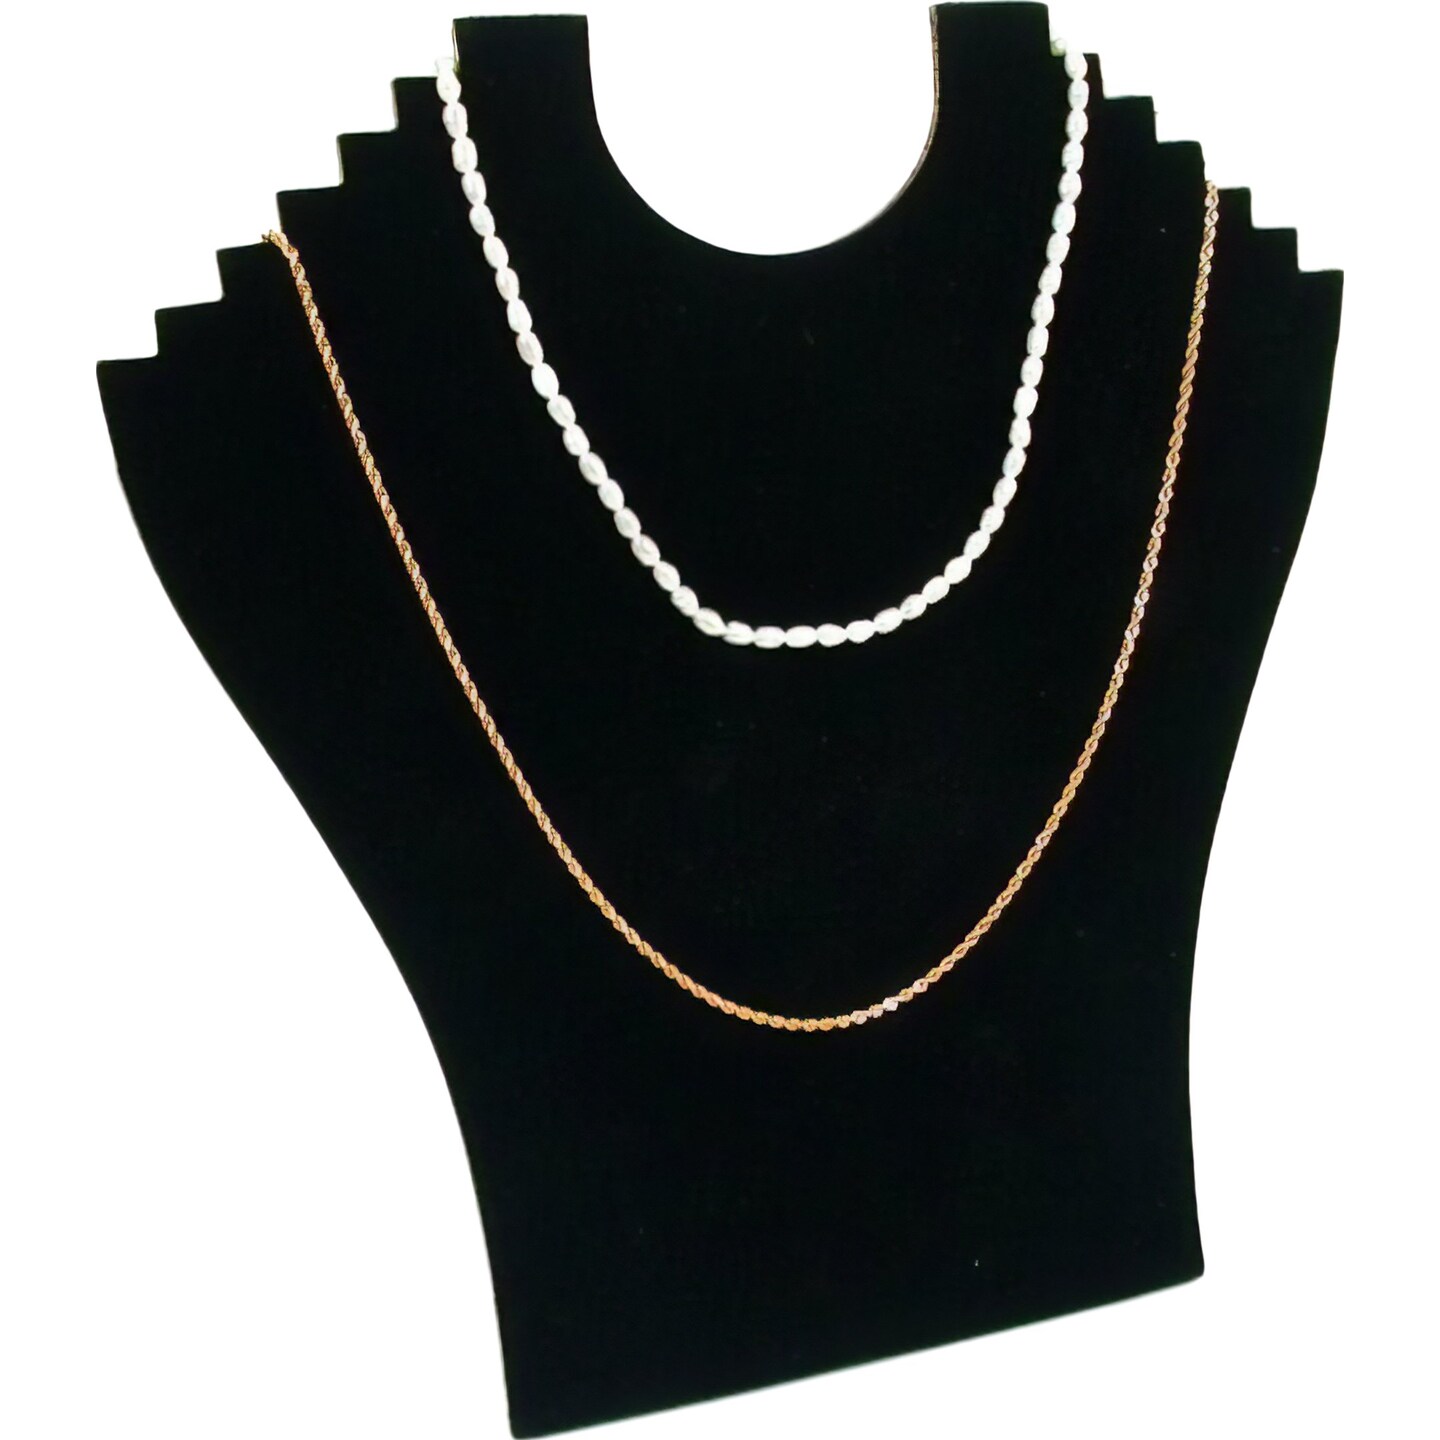 6 Tier Black Flocked Cardboard Necklace Chain Display Bust Easel